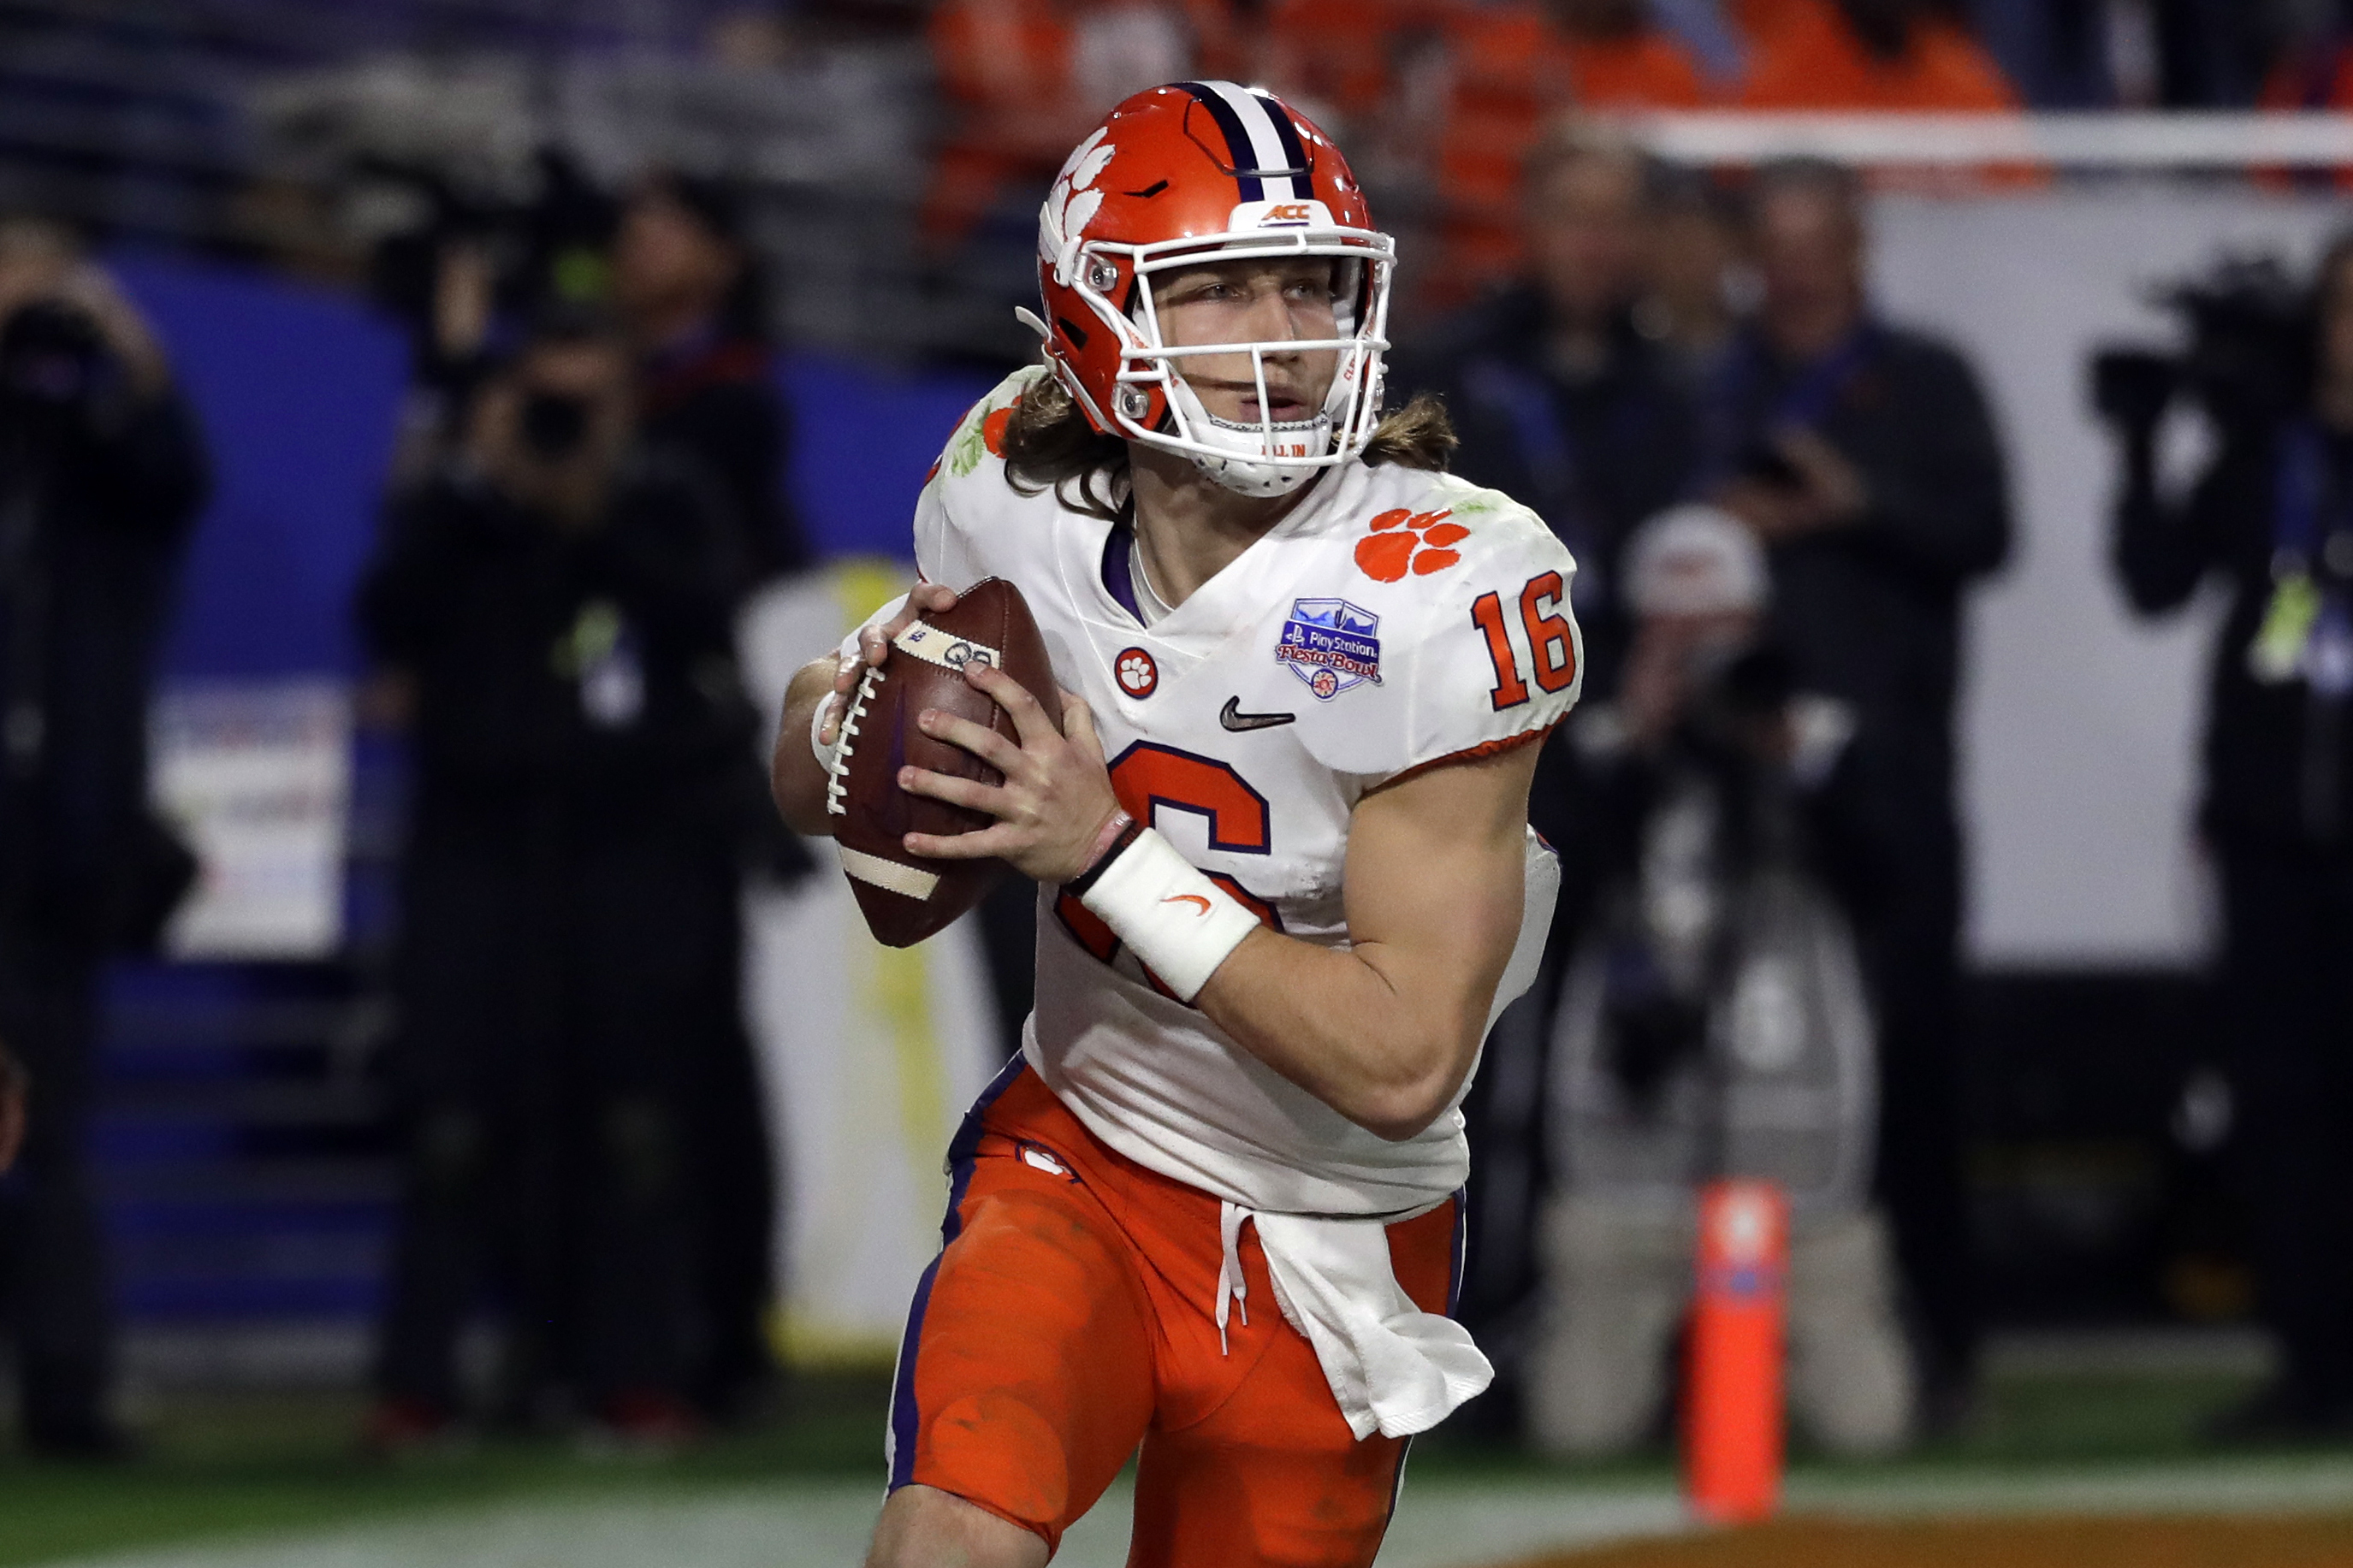 17 HQ Images Ncaa Football Championship Odds 2020 / Notre Dame Vs Clemson Odds Prediction Betting Trends For 2020 Acc Championship Sporting News